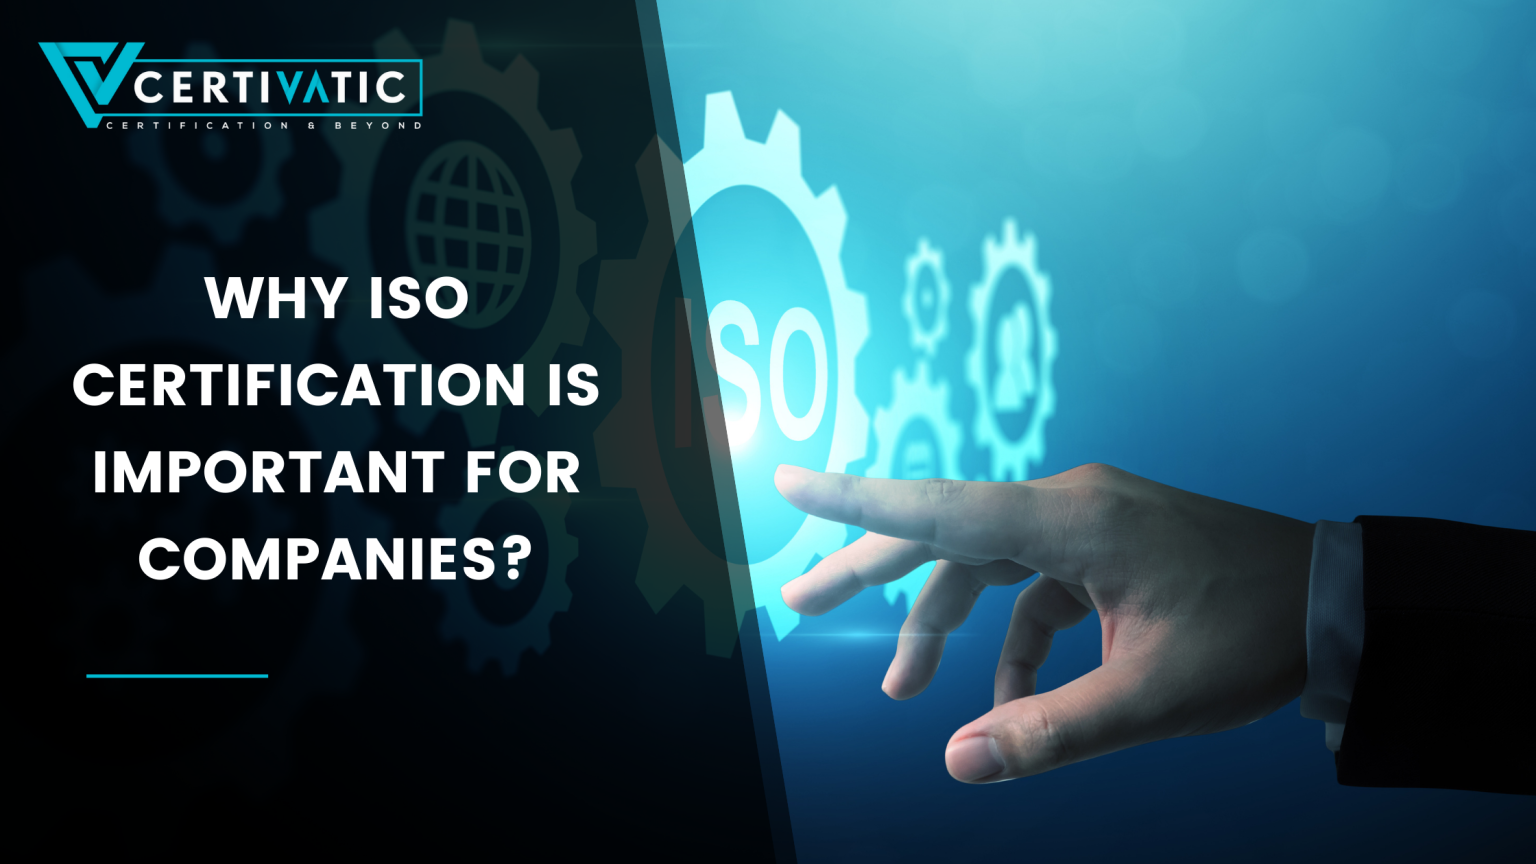 Why ISO Certification is important for companies? ISO Certification